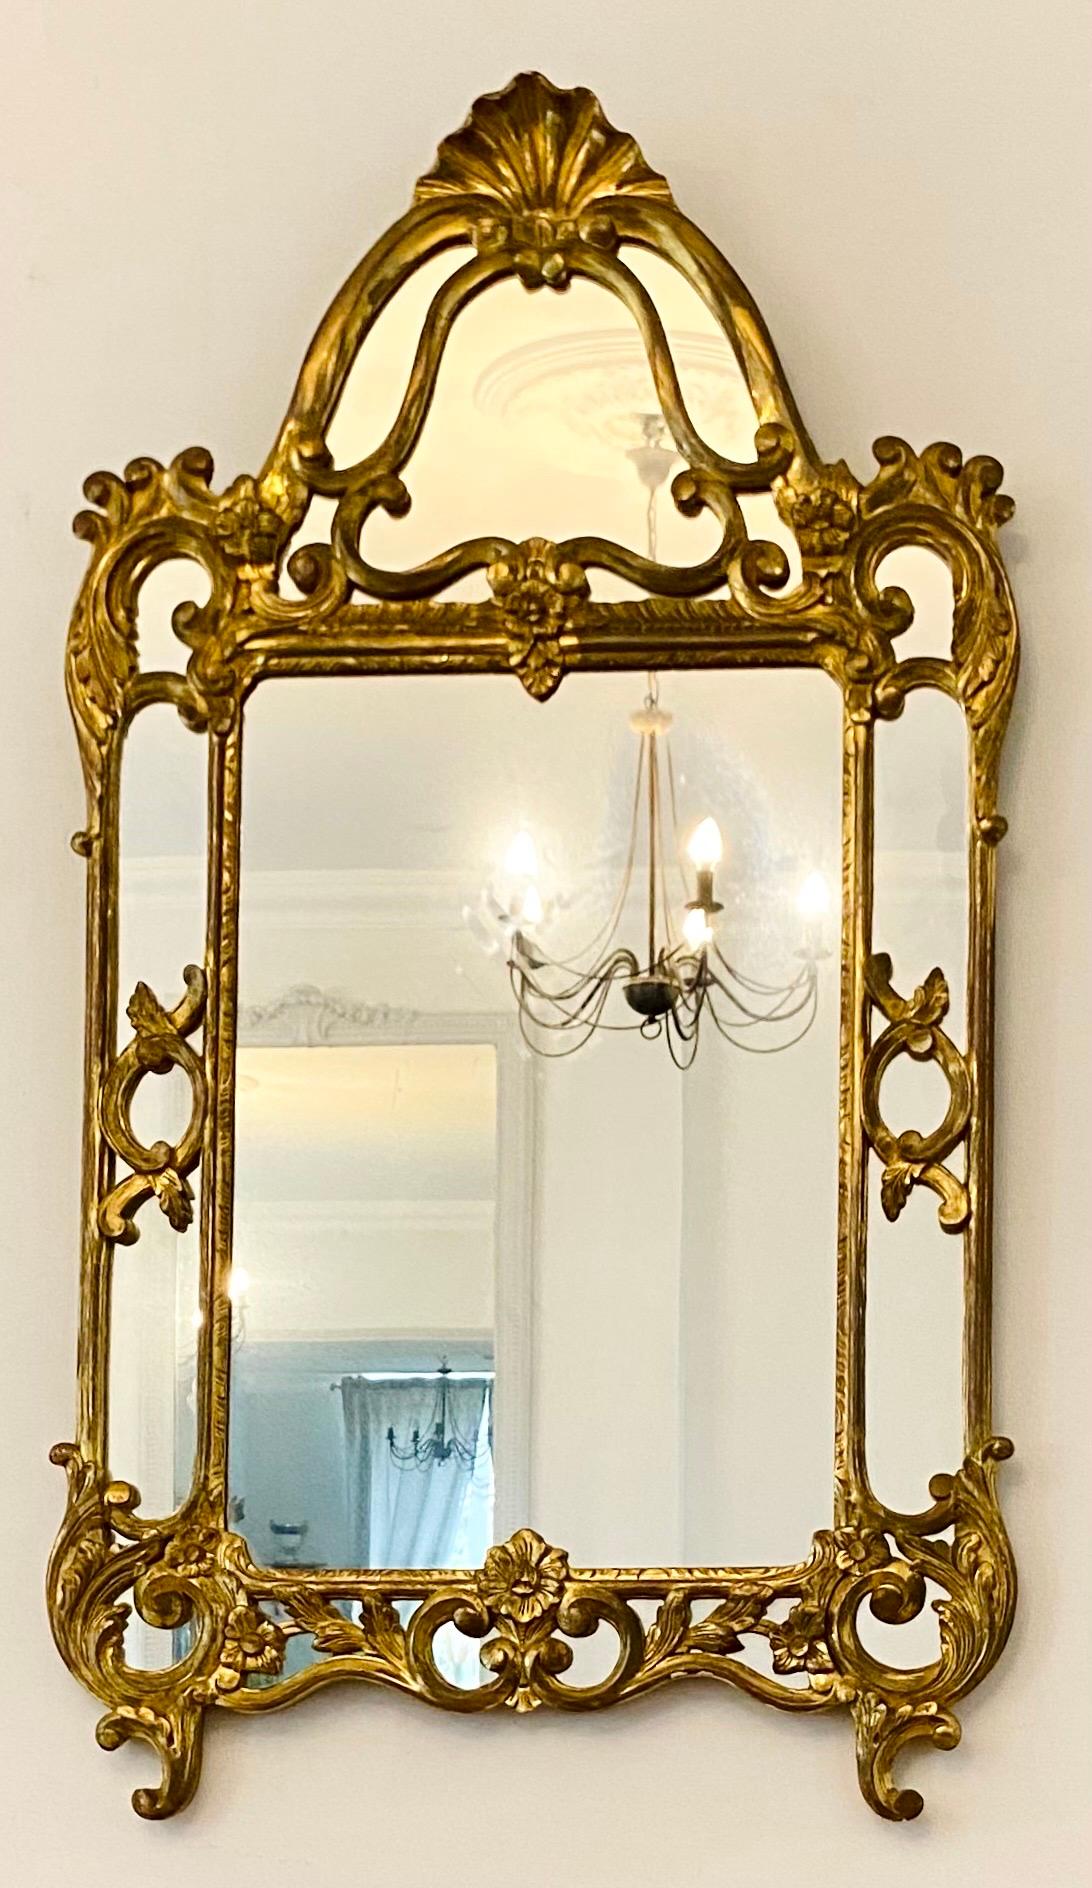 Gorgeous Louis XIV style glazing bead mirror in golden wood.
In the style of Italian mirrors, baroque style.
Decor of intertwined foliage and flowers.
Pediment decorated with shells.
Beautifully worked double gilt frame.
All mirror plates, glasses